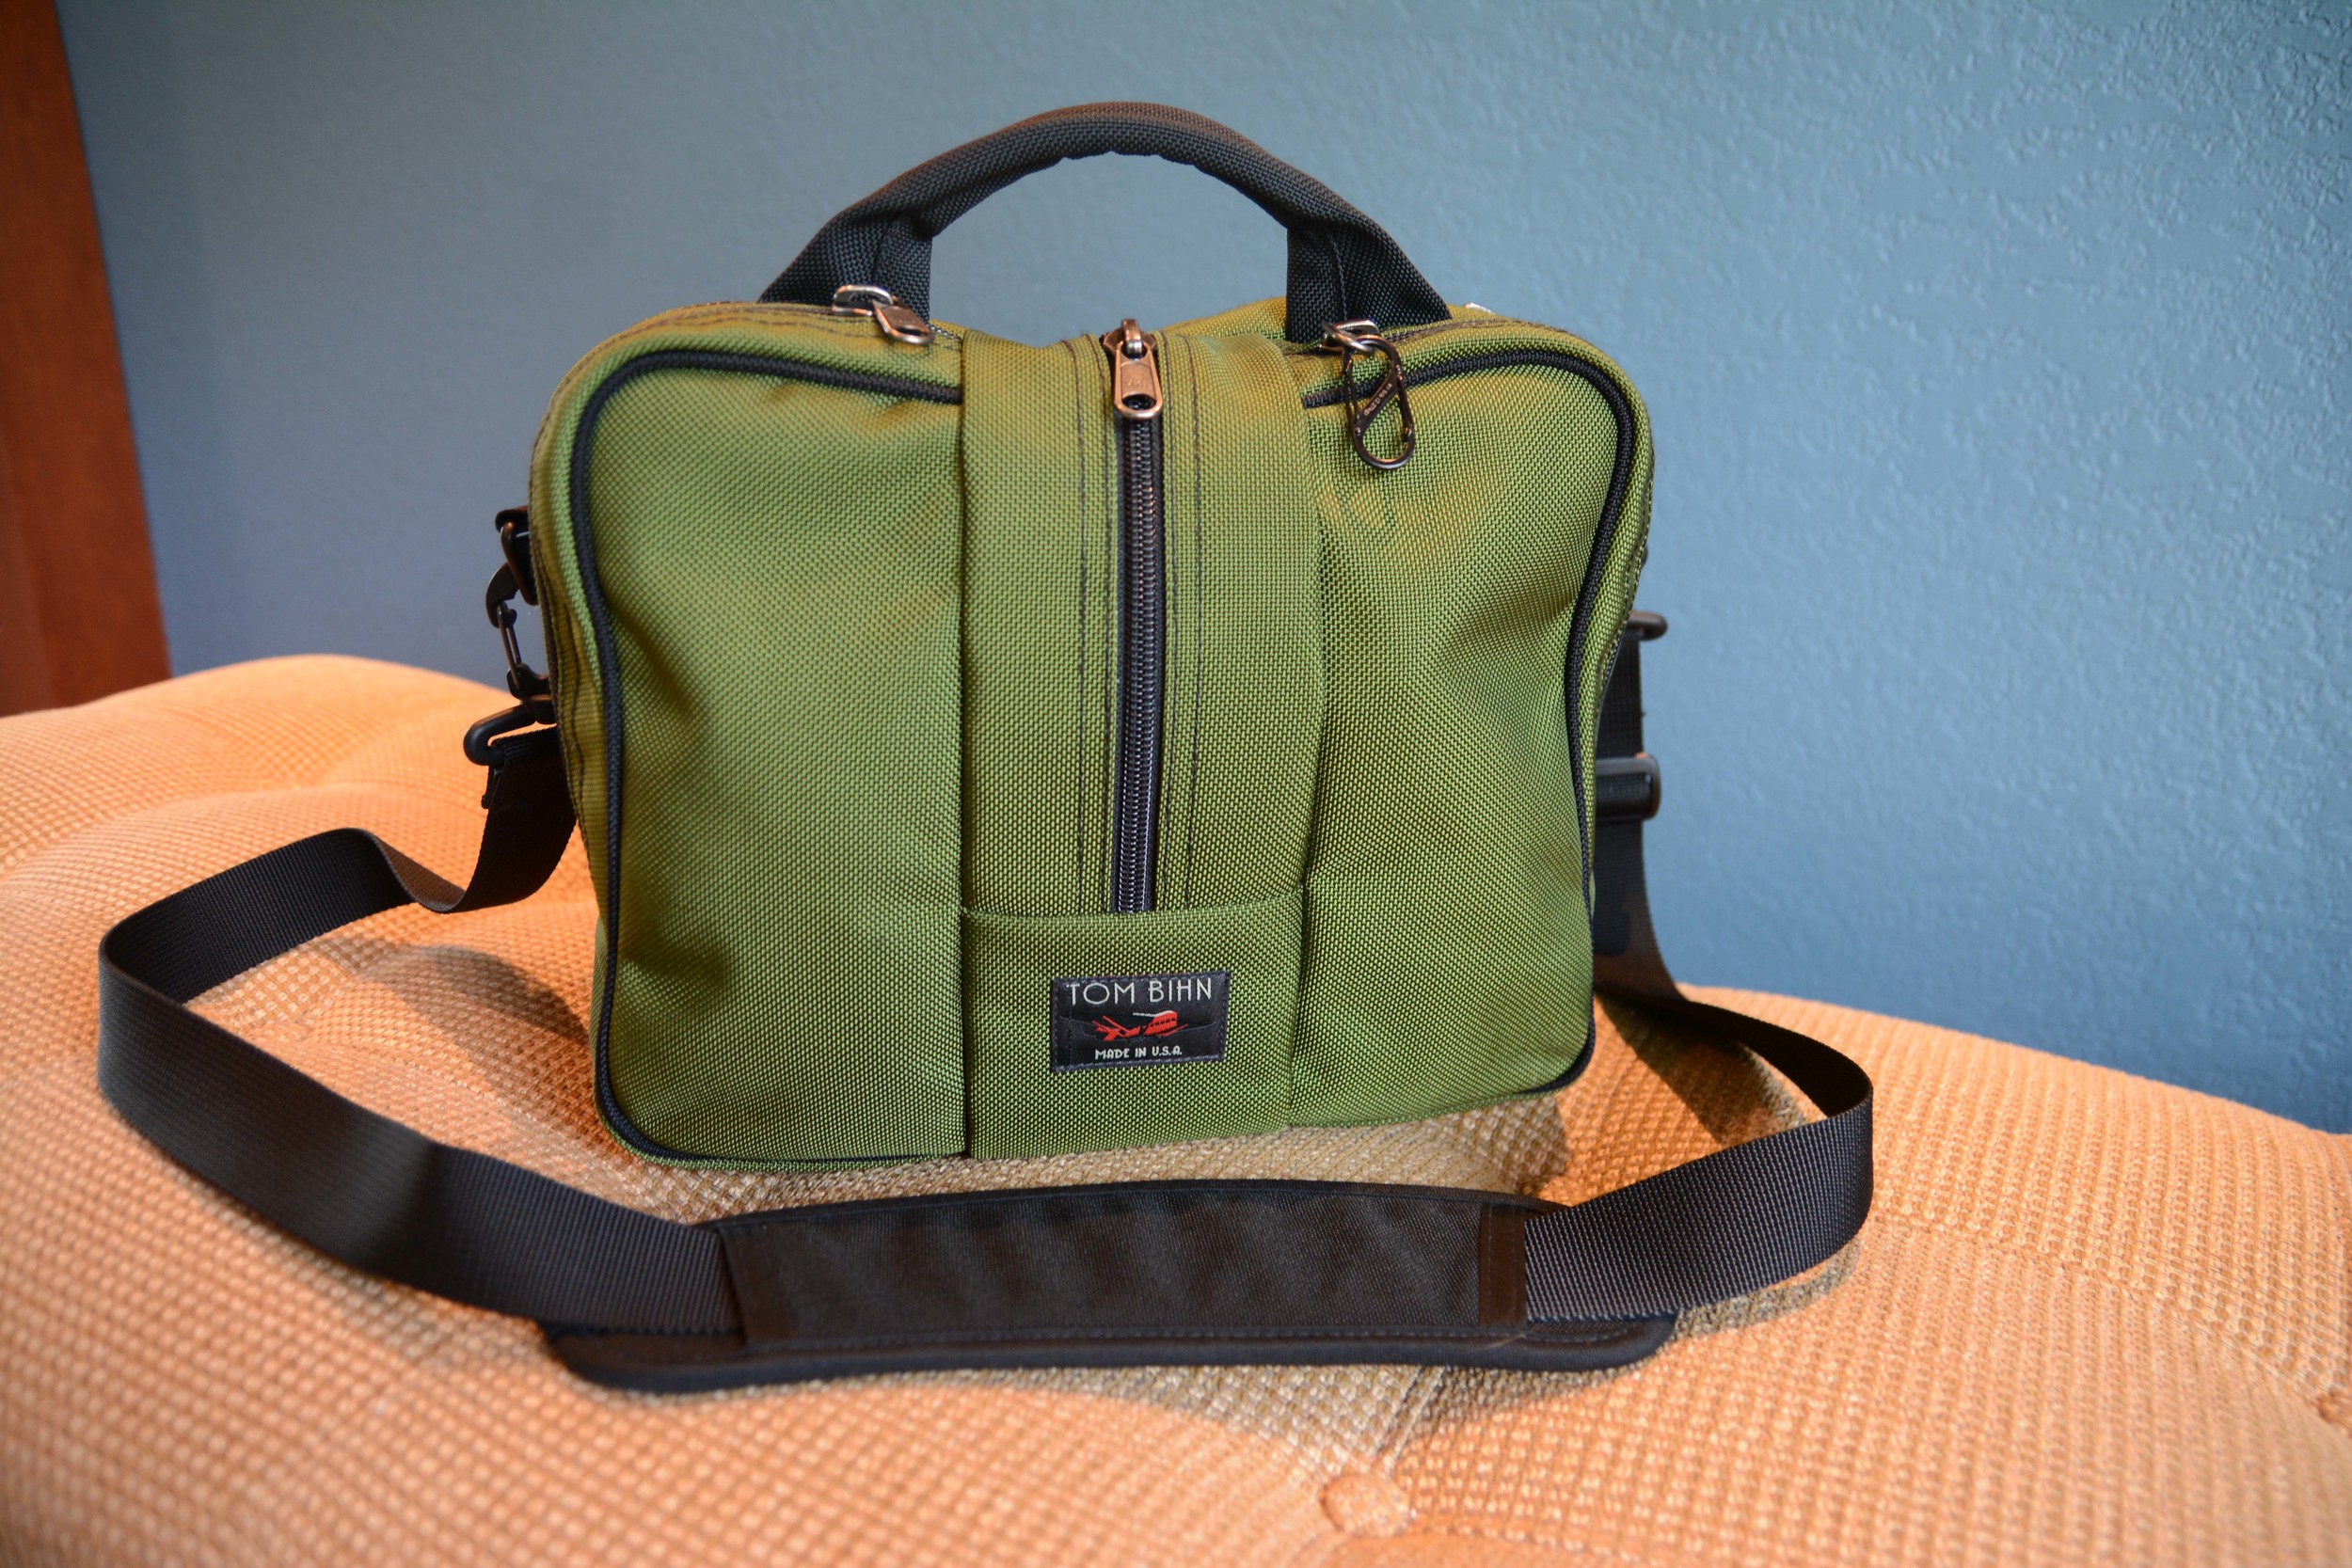 Delfonics Utility Bag Review - The Well-Appointed Desk